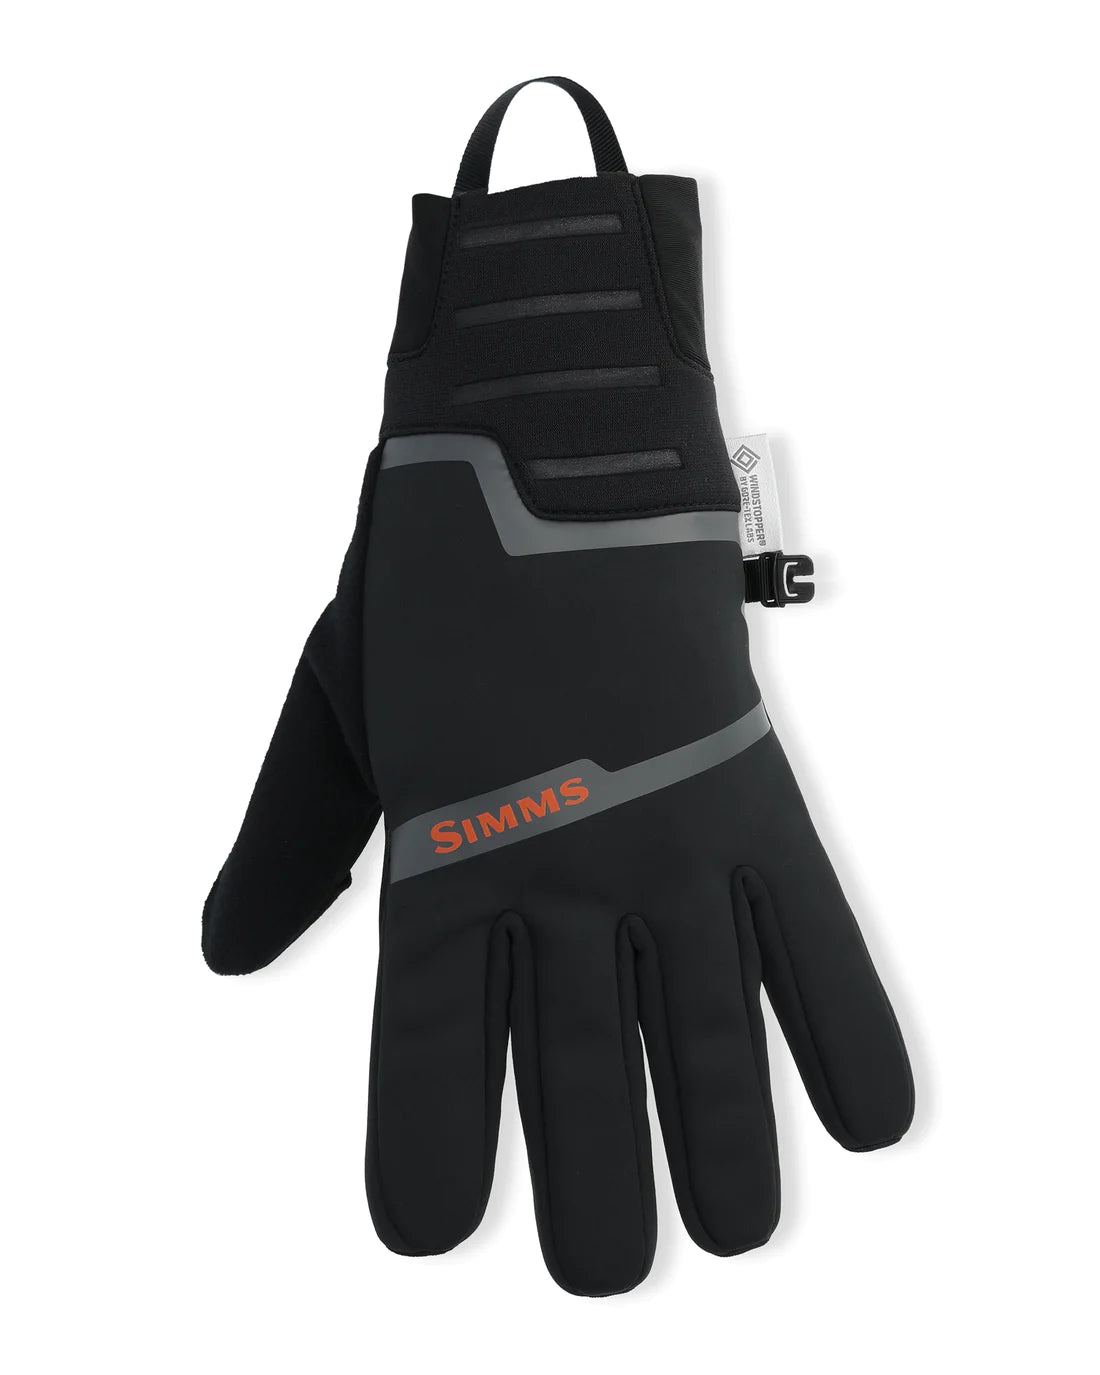 Windstopper Flex Fishing Glove – Northwest Fly Fishing Outfitters